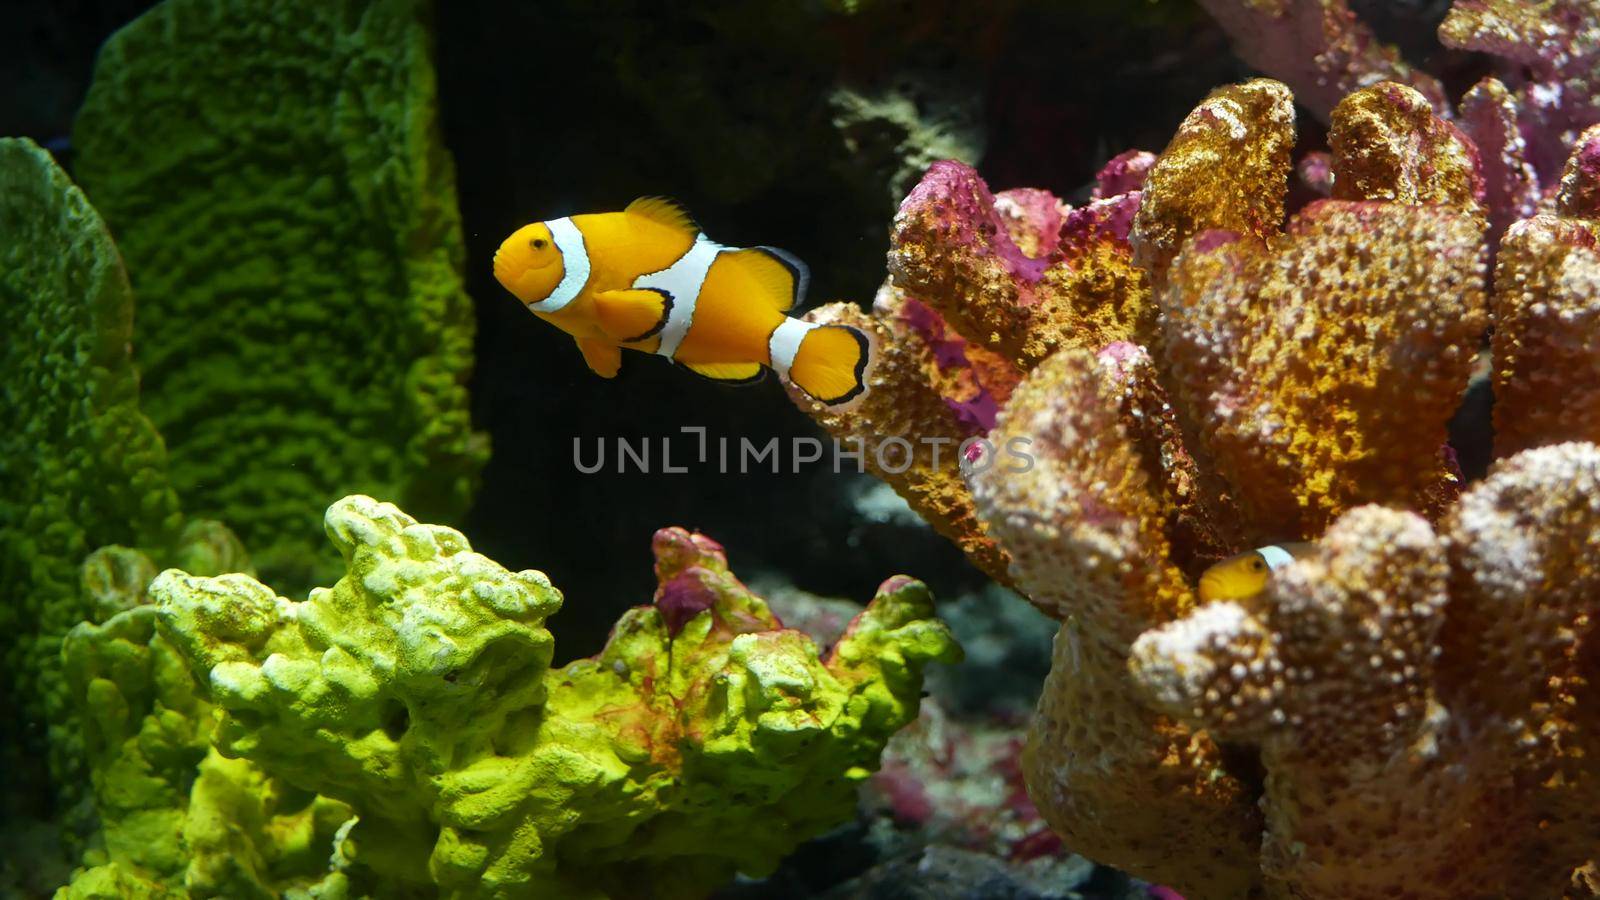 Clownfish near coral in aquarium. Small clownfish swimming near various majestic corals on black background in aquarium water. Marine underwater tropical life natural background by DogoraSun